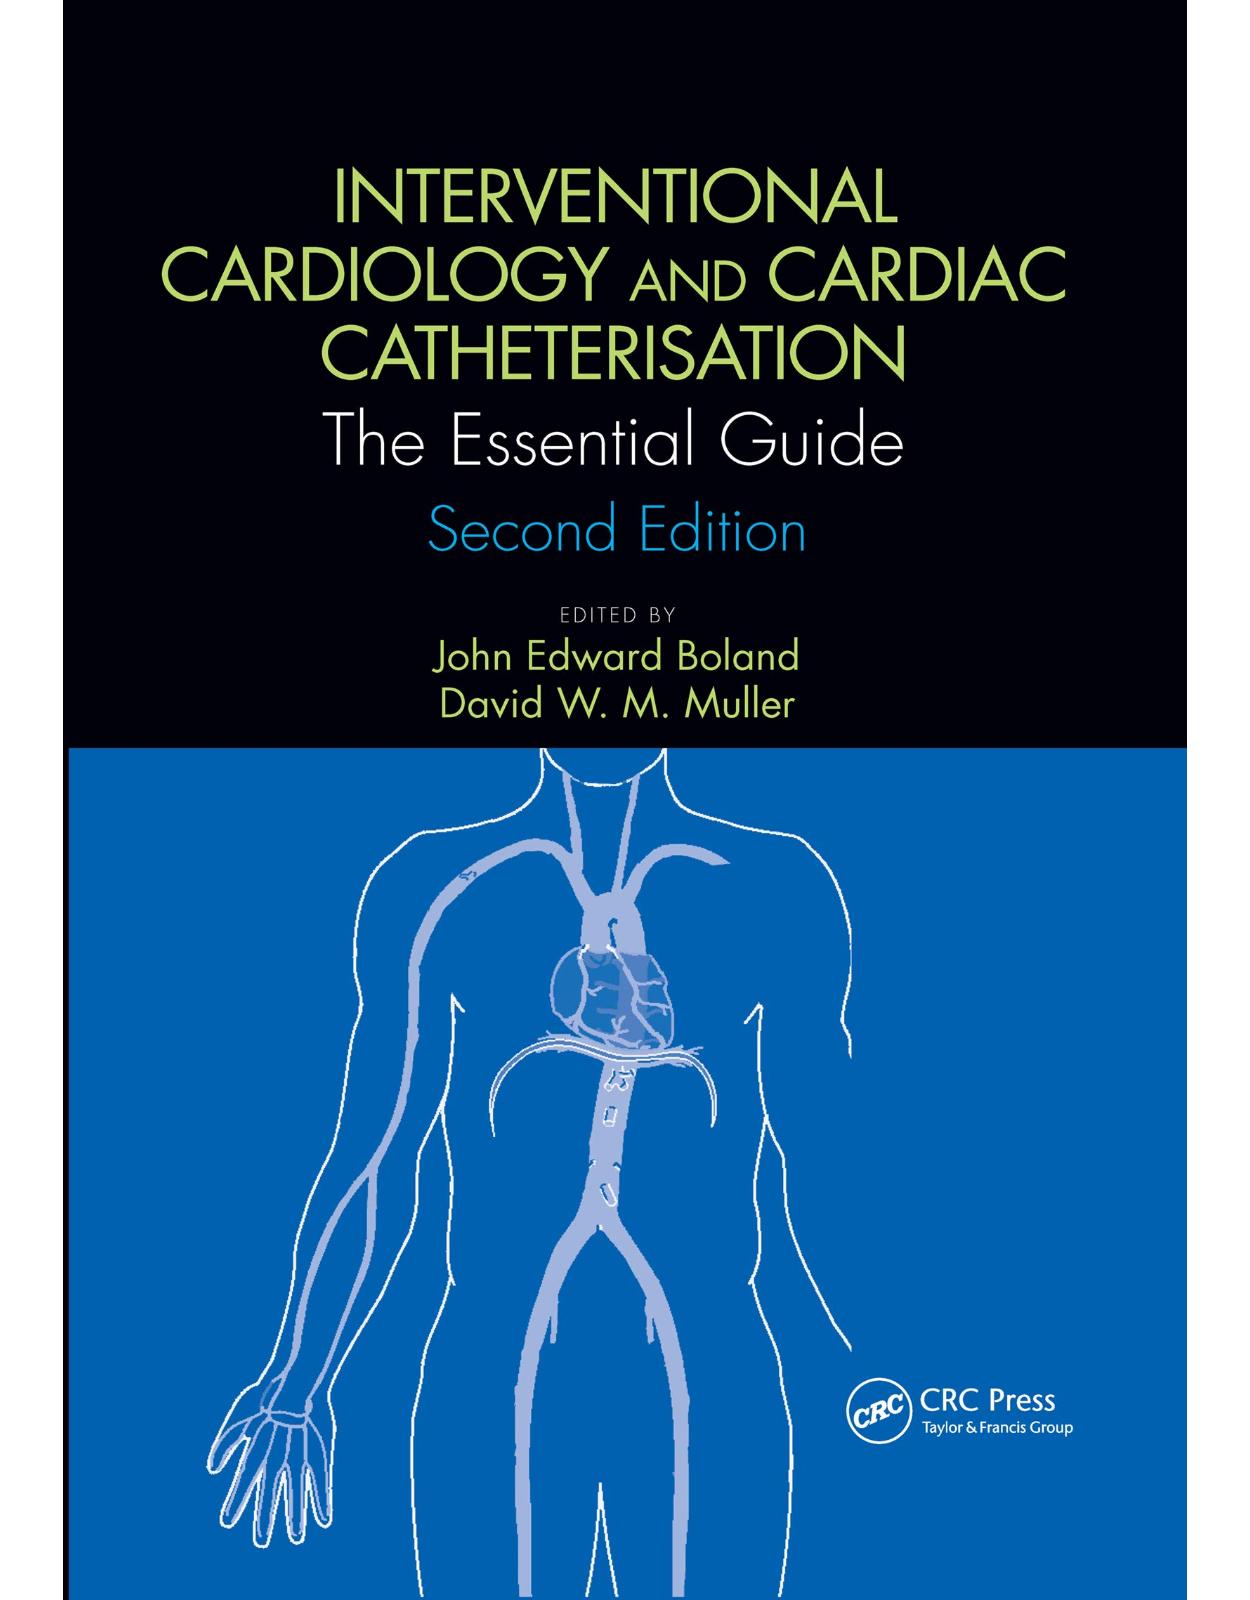 Interventional Cardiology and Cardiac Catheterisation: The Essential Guide, Second Edition